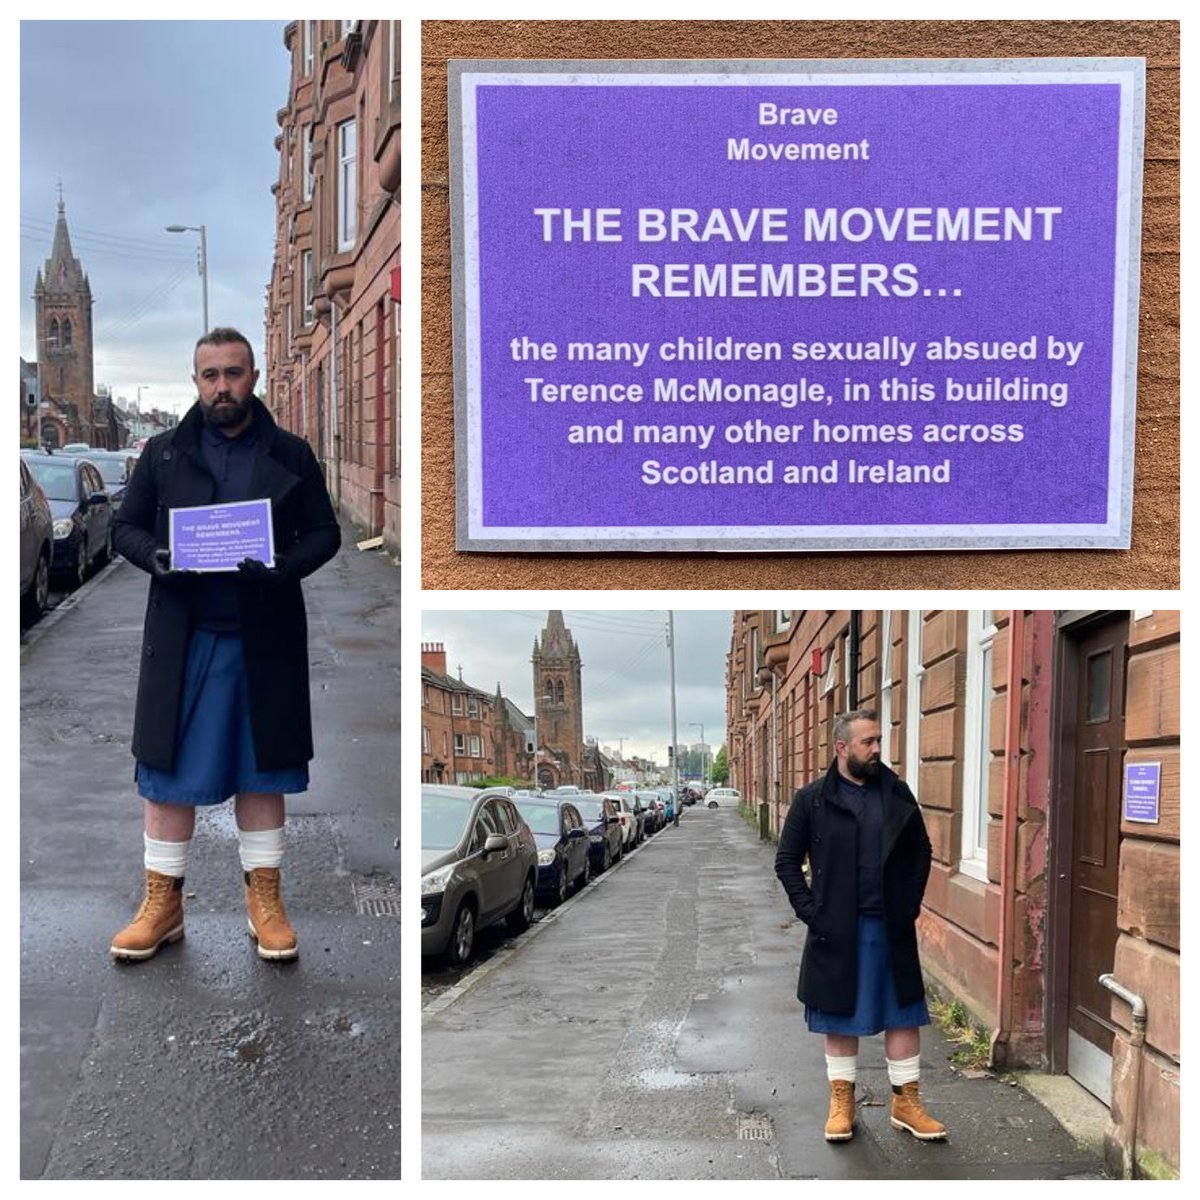 I was regularly sexually abused in a tenement flat opposite Scotland's First Minister's constituency office in Glasgow, until March 24th 1996. Today, at least 1 in 5 children will suffer abuse. Sign our petition, End Childhood Sexual Violence Now bravemovement.org #BeBrave